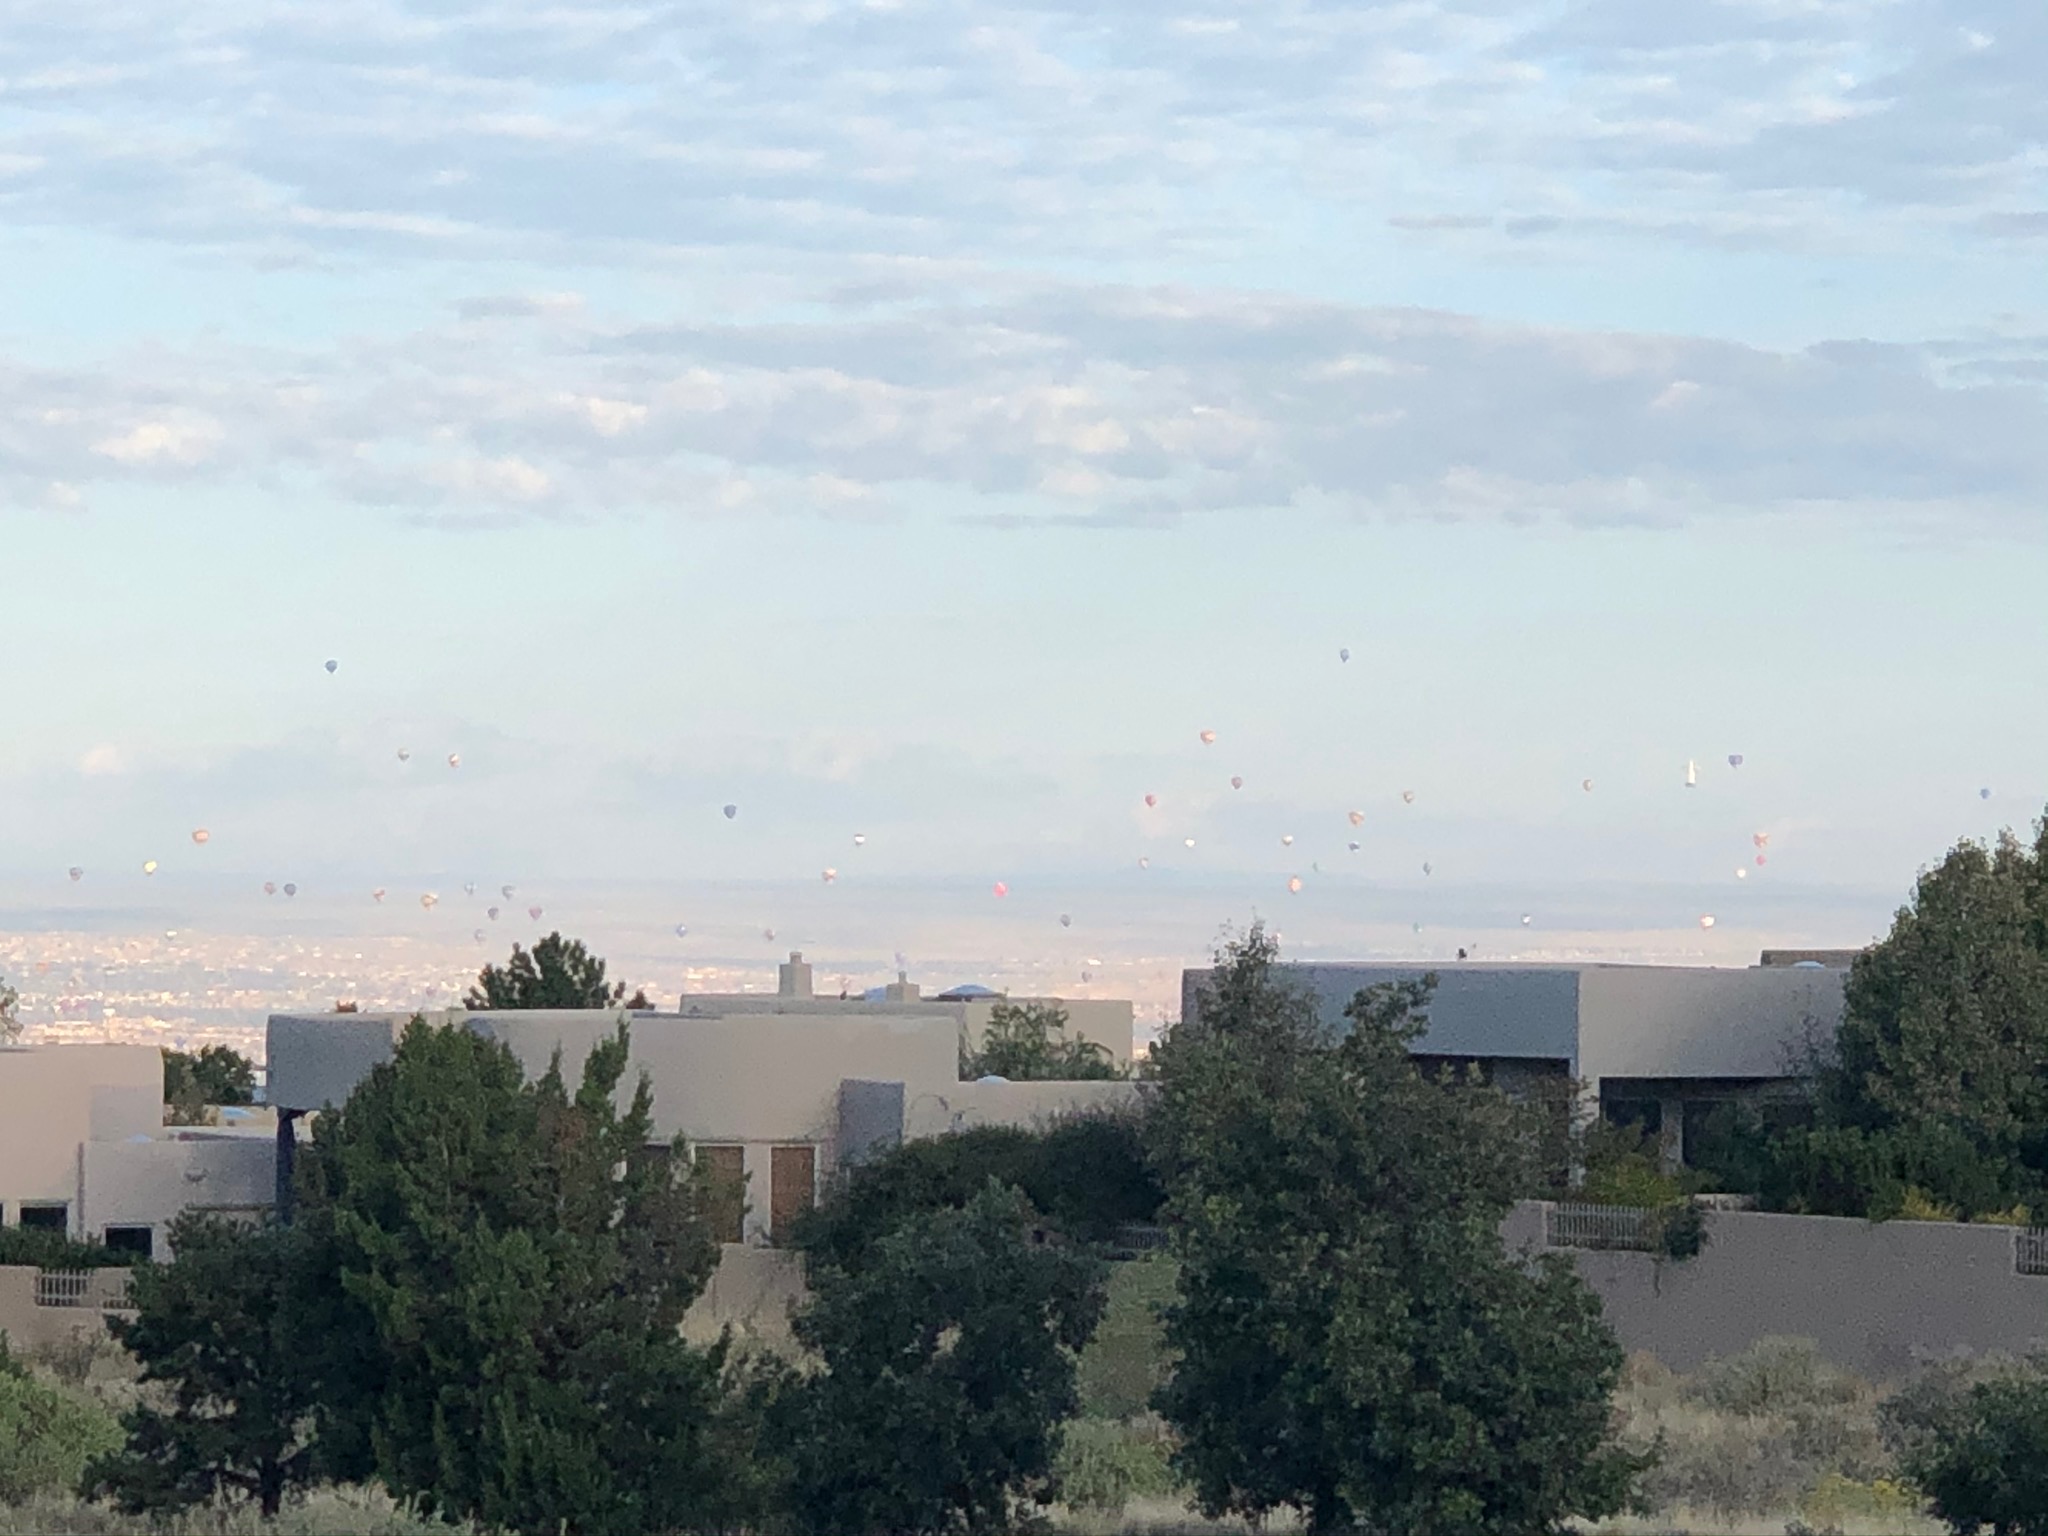 Balloons over valley